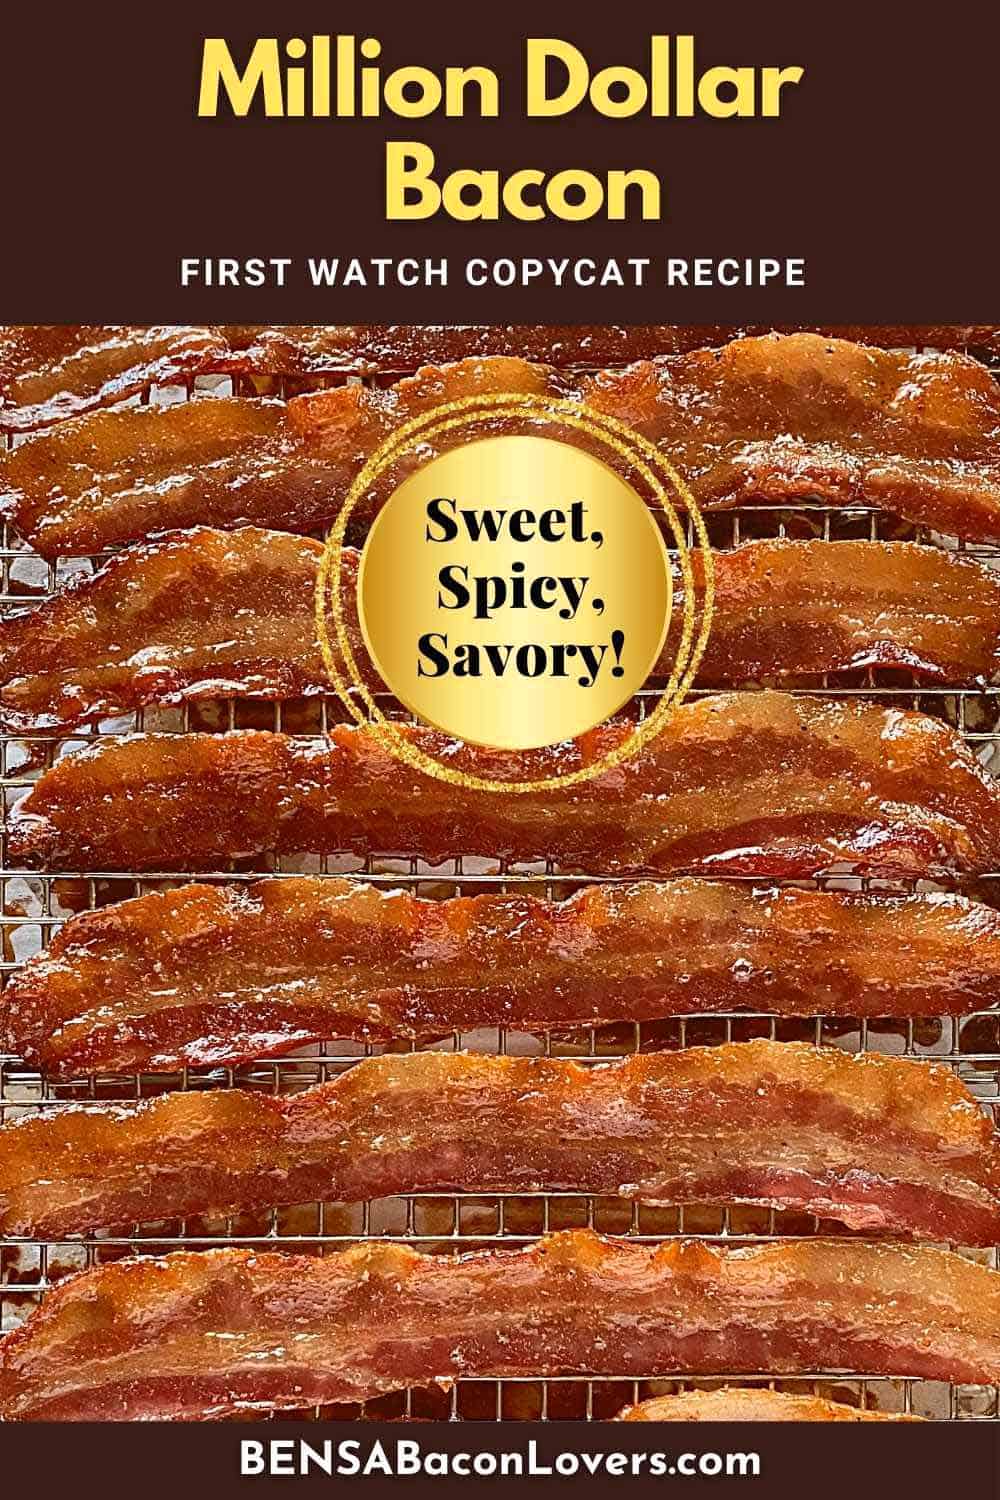 Ten strips of glazed, cooked million dollar bacon for a Pinterest pin.